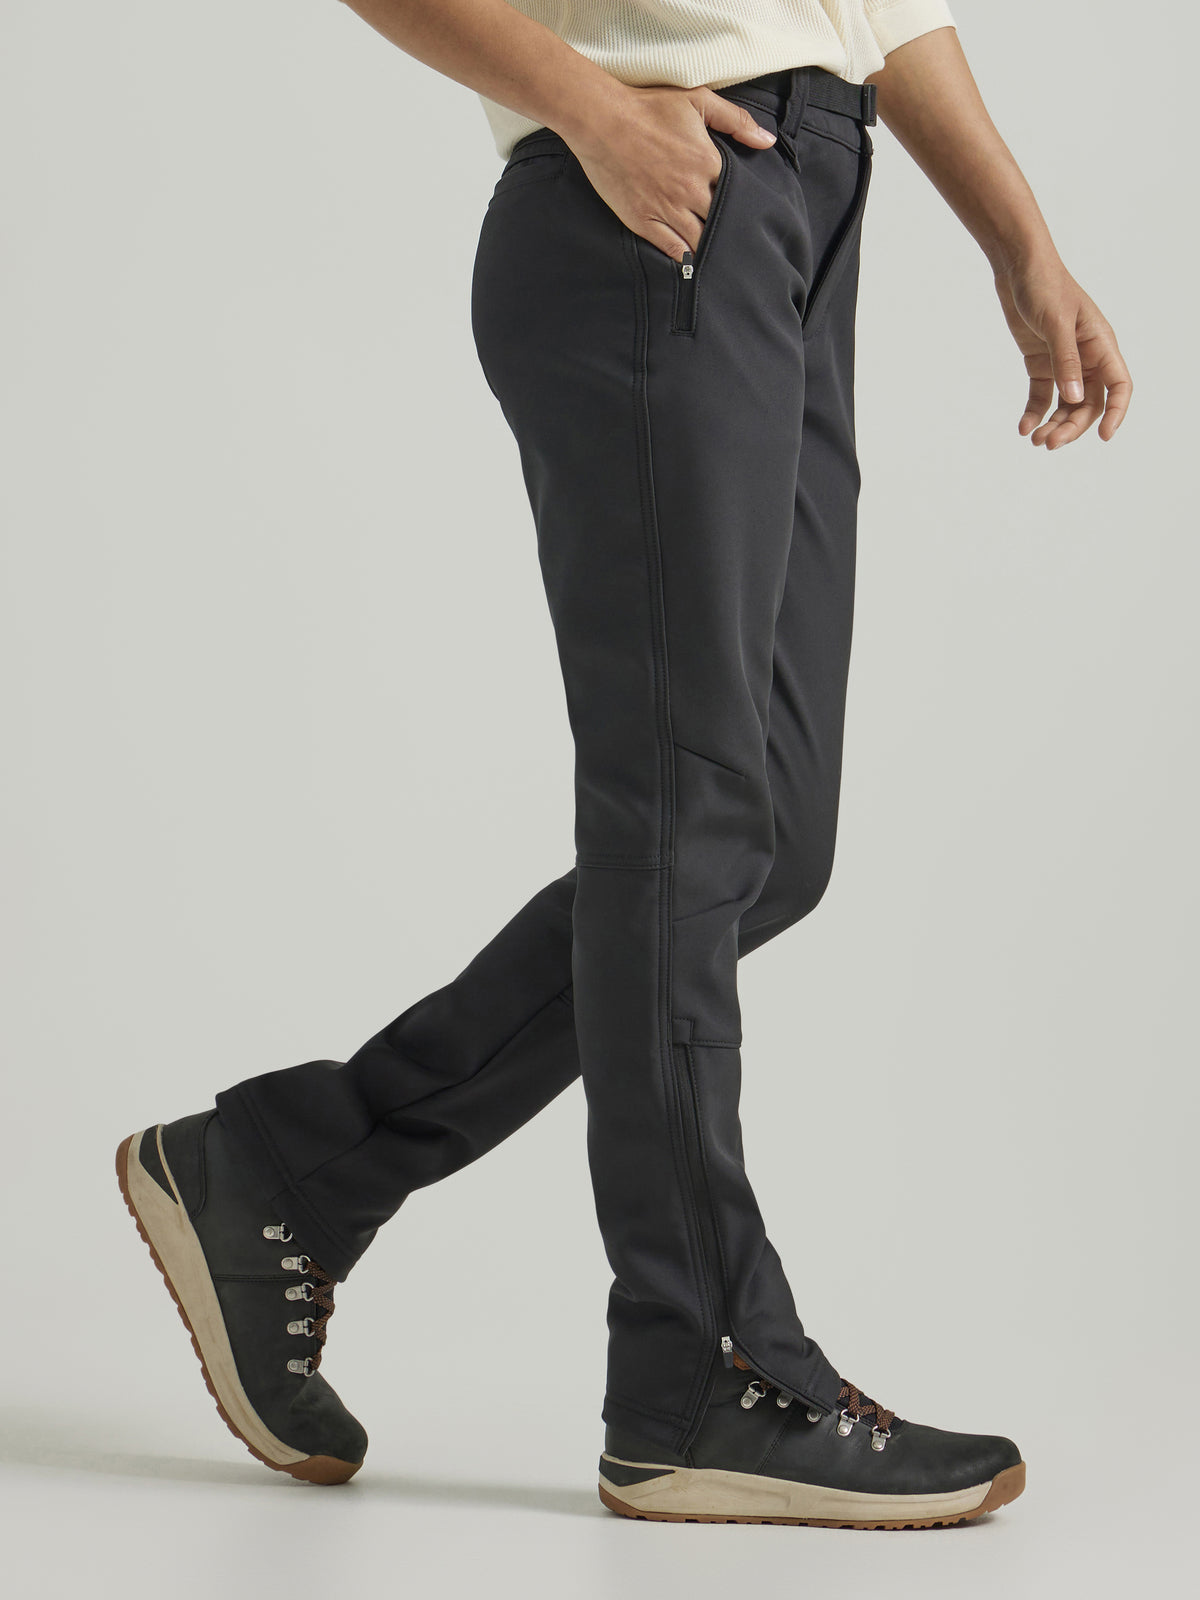 Softshell Pant in Jet Black